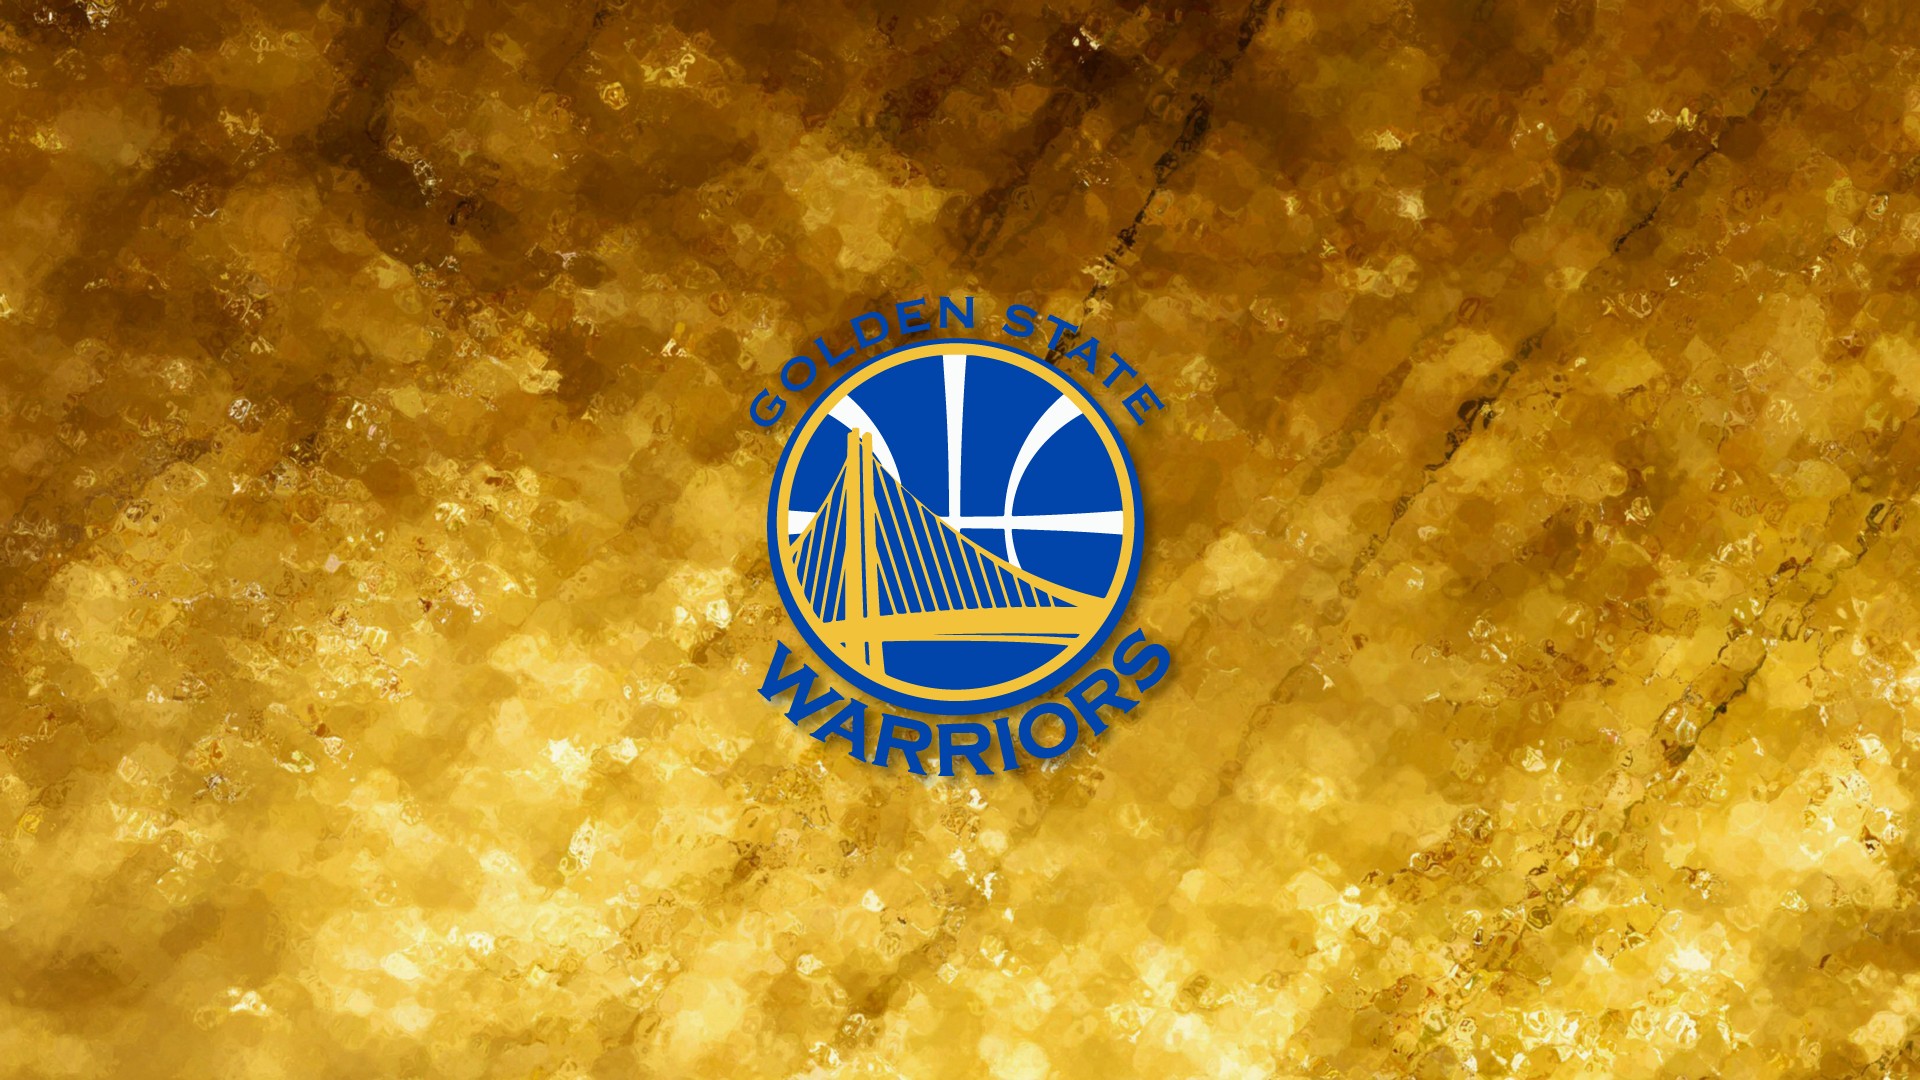 Best Golden State Warriors Wallpaper with resolution 1920X1080 pixel. You can use this wallpaper as background for your desktop Computer Screensavers, Android or iPhone smartphones